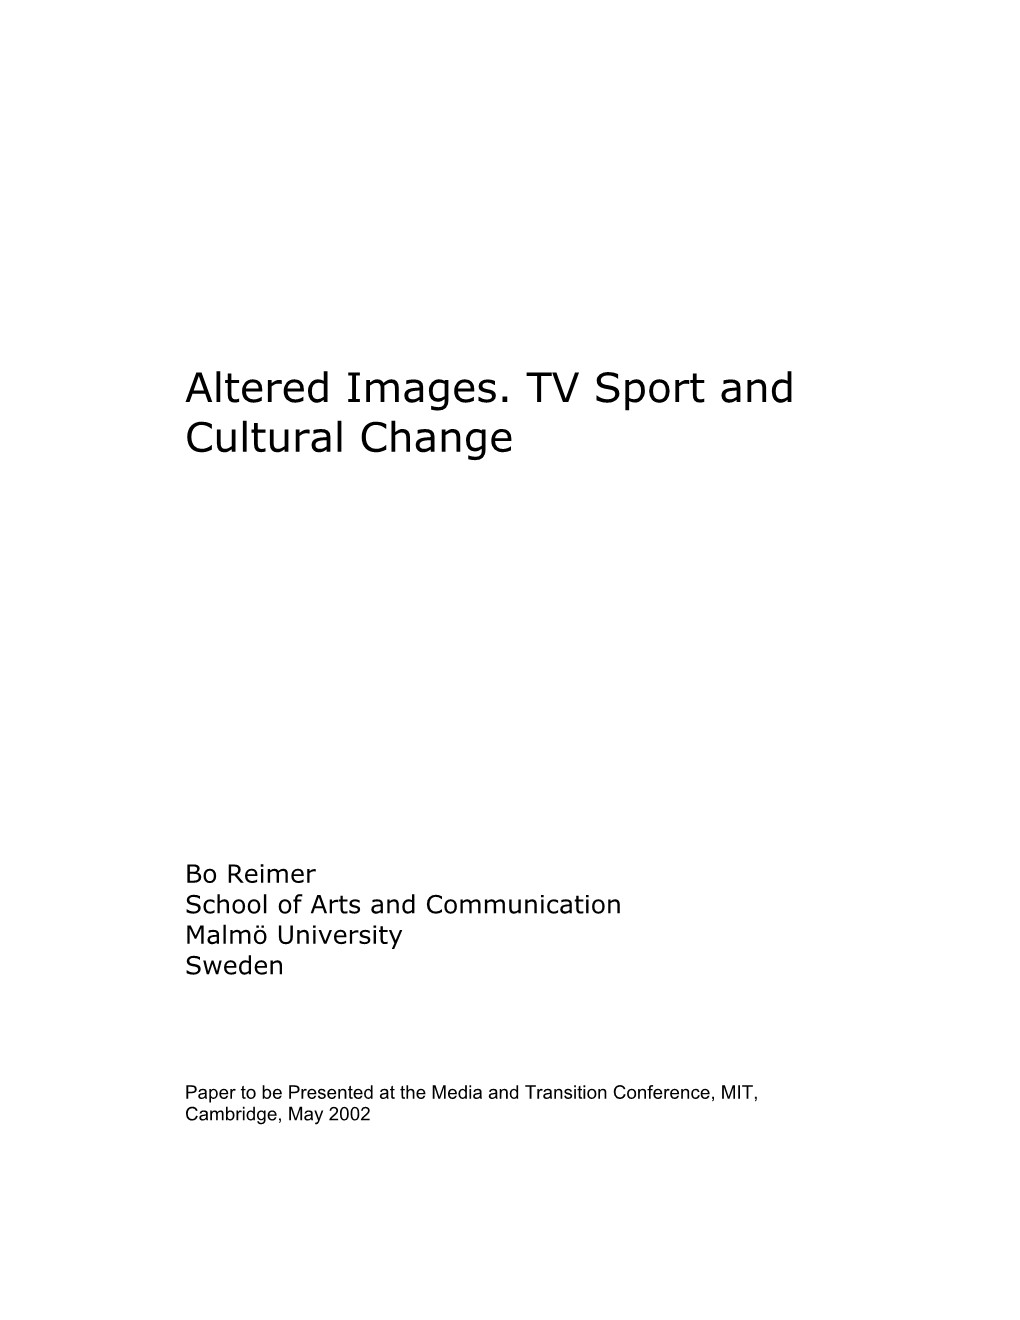 Altered Images. TV Sport and Cultural Change